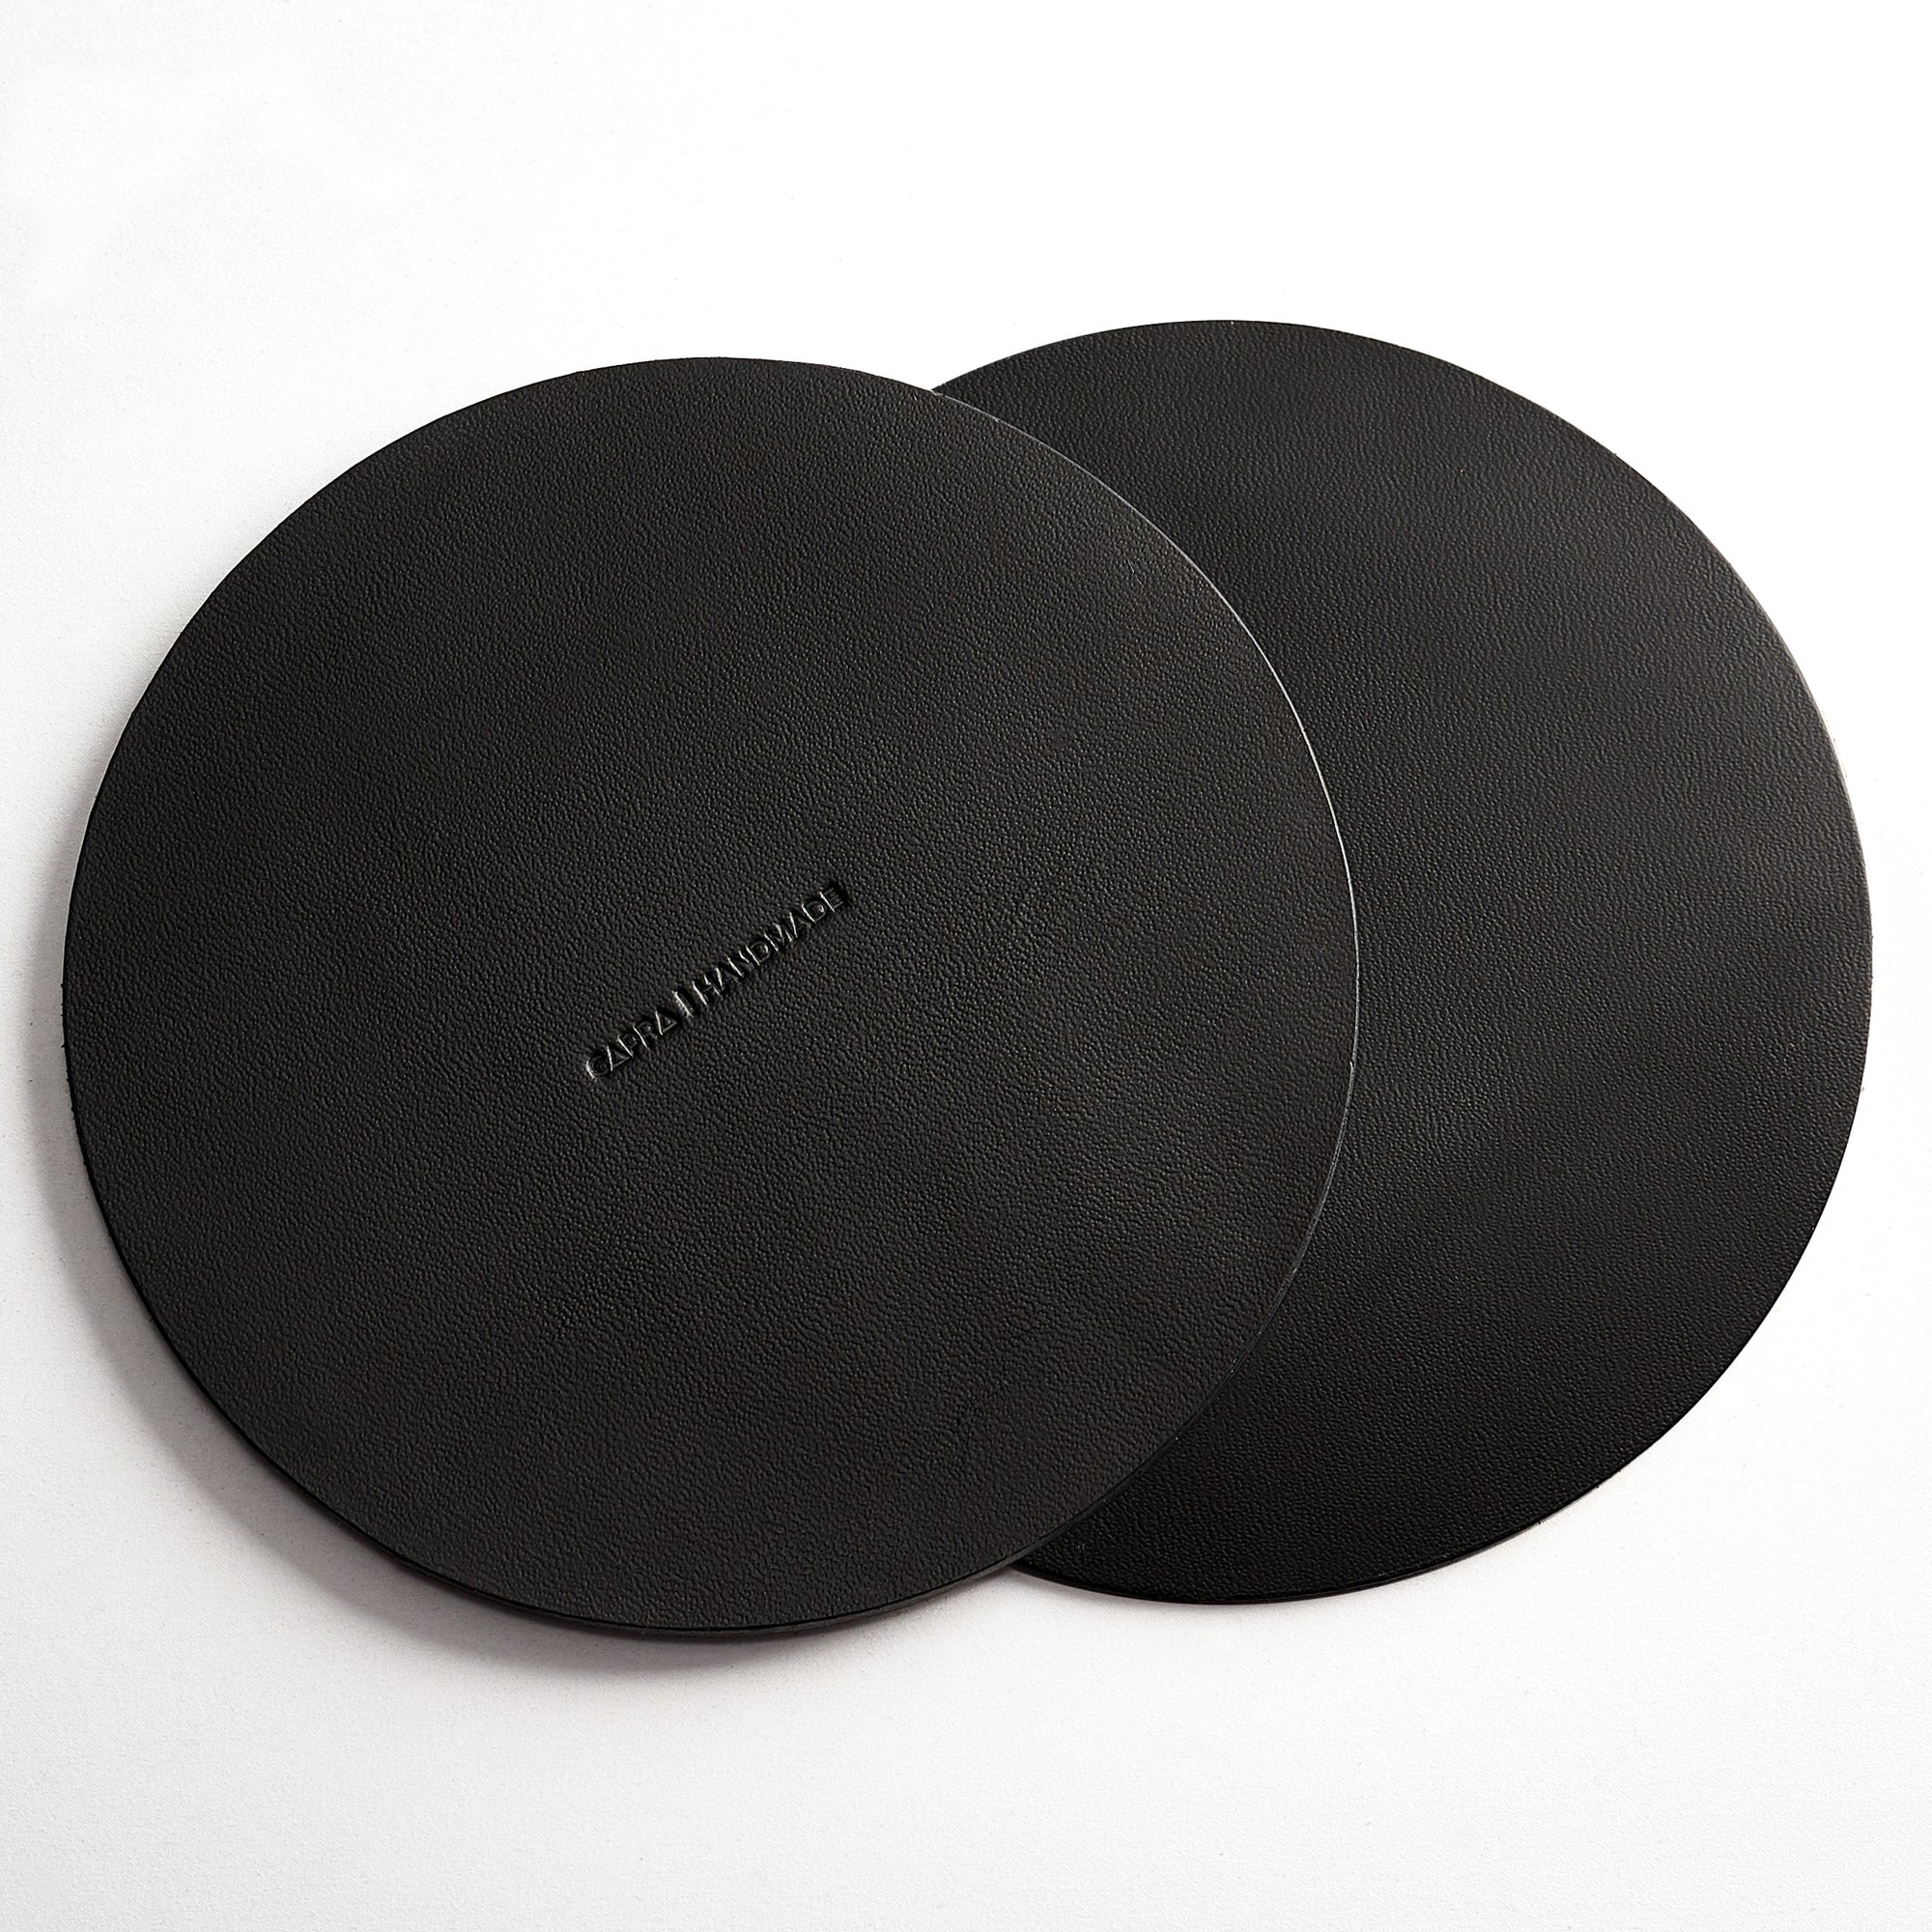 Black Leather homepod pad, protect wood surfaces from white rings, mens cowhide coasters for apple smart speaker